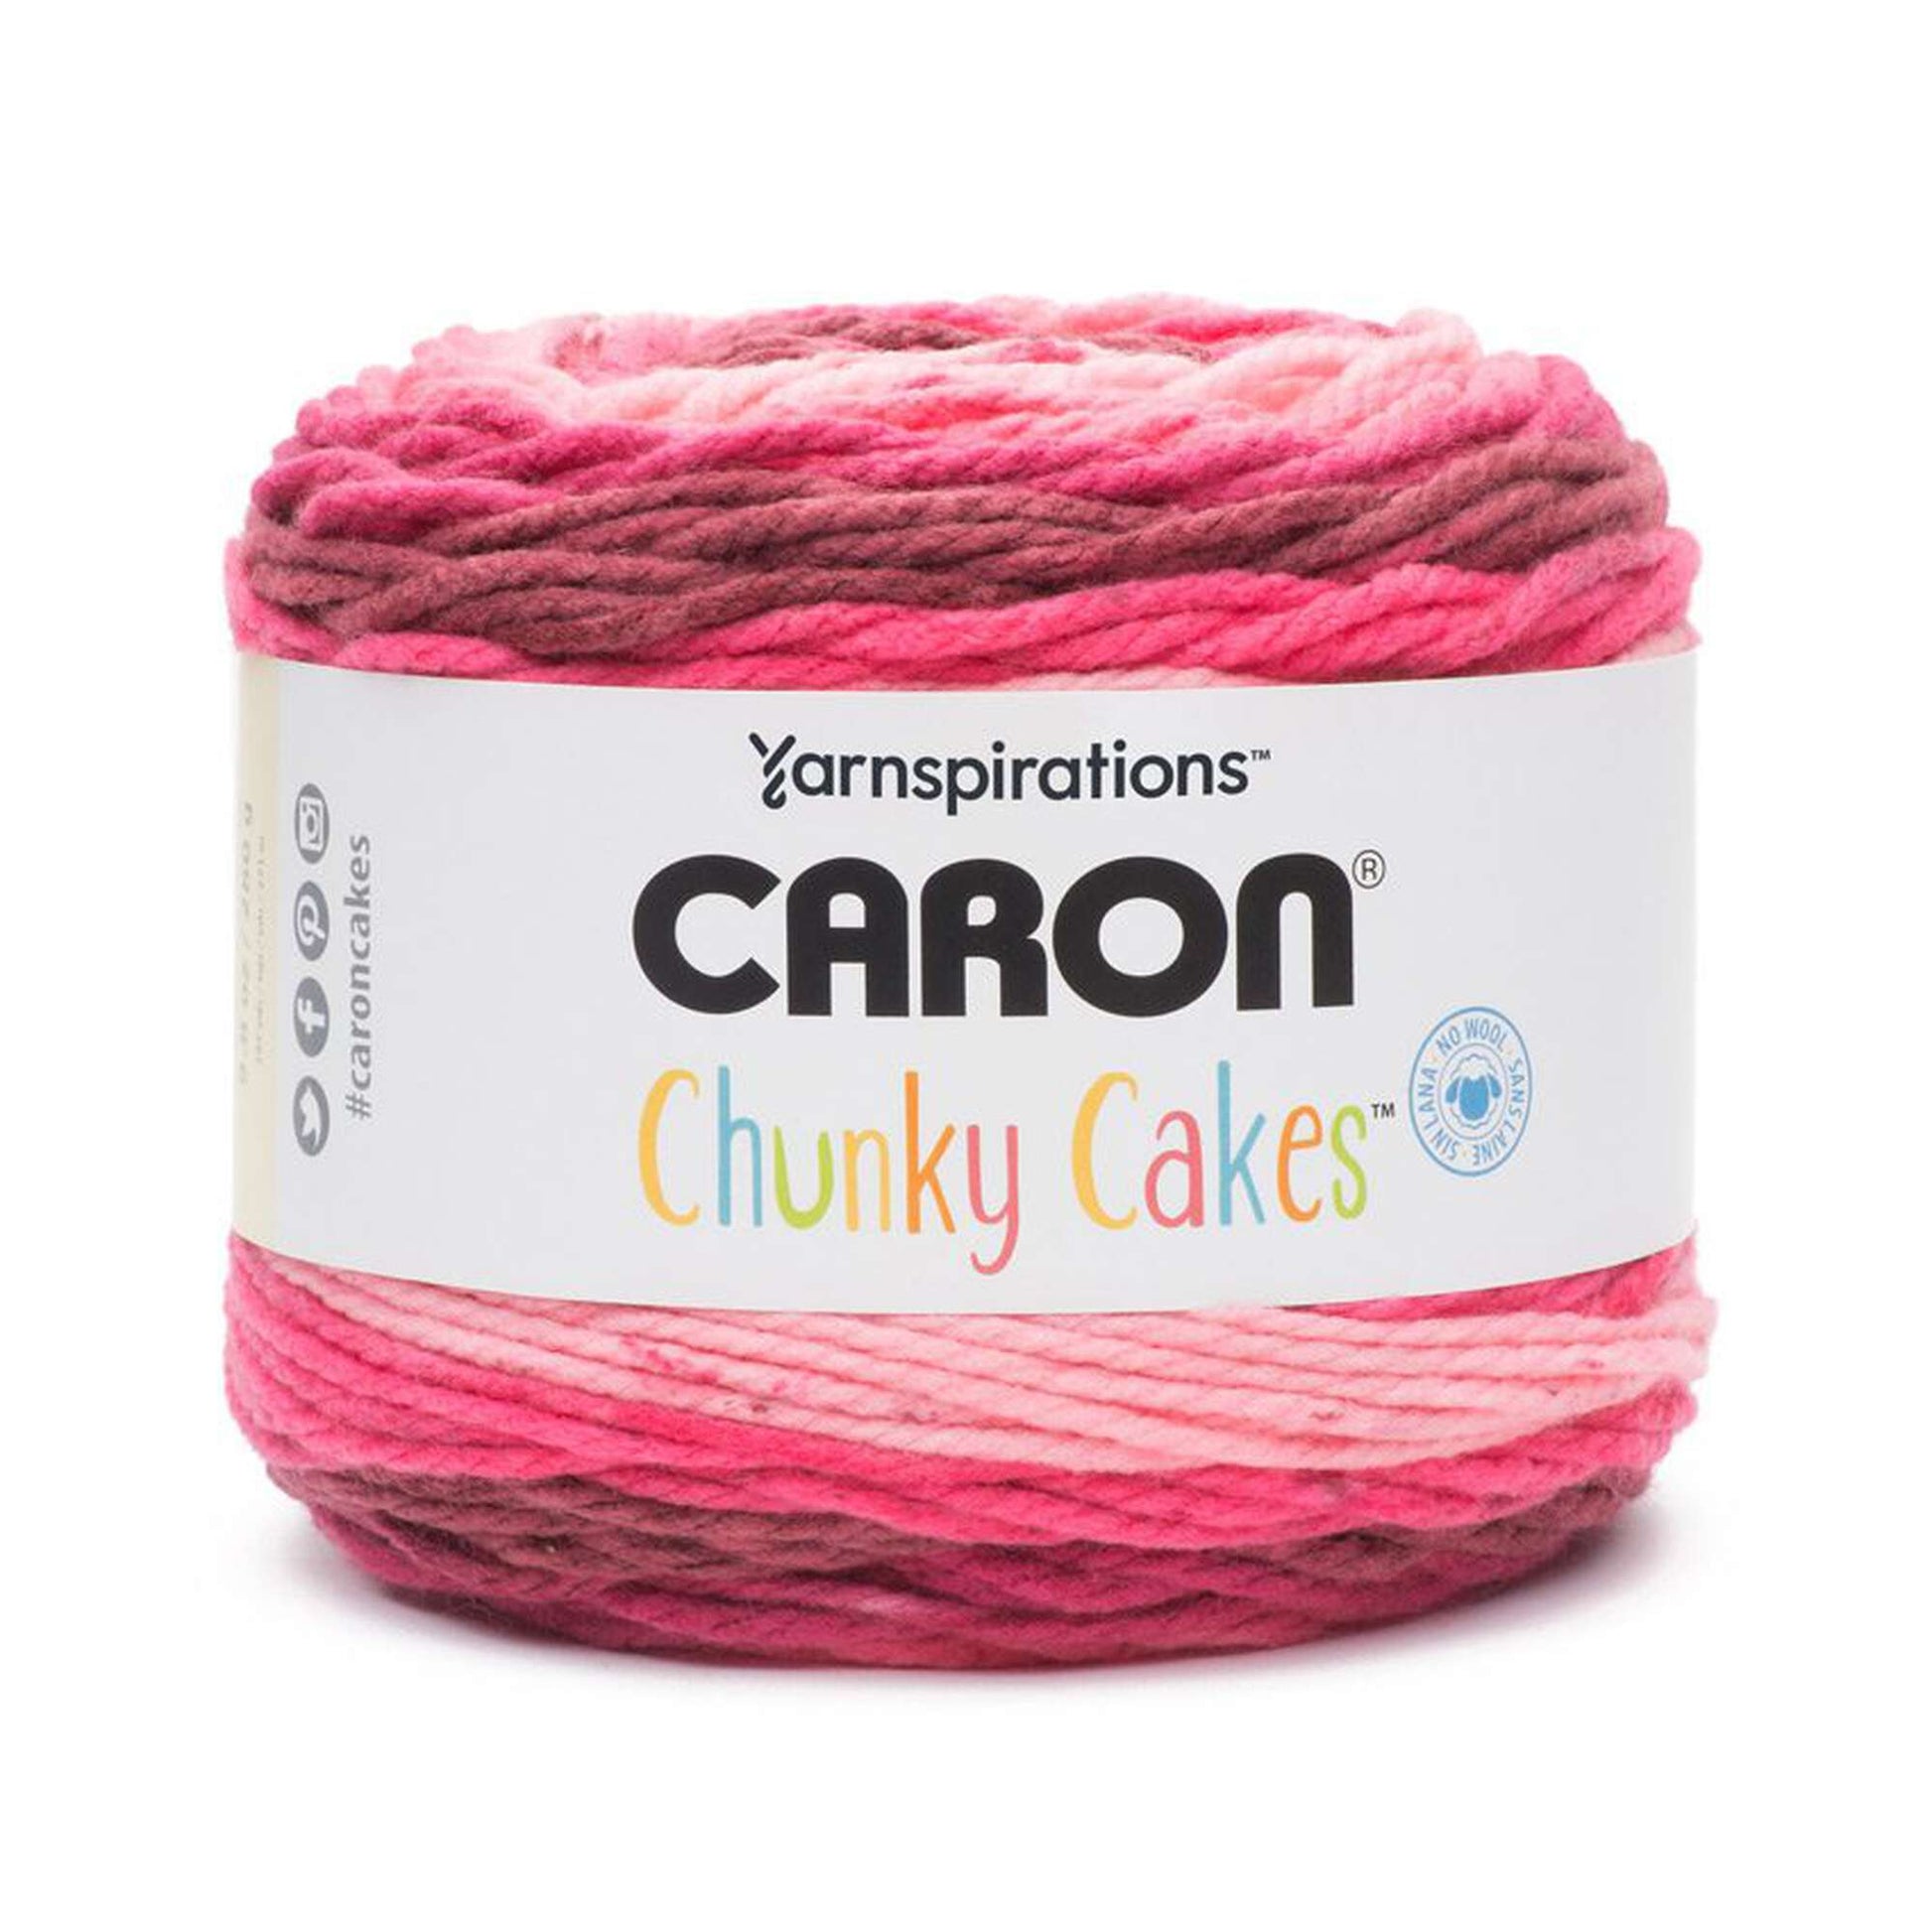 Caron Chunky Cakes! Mystic Chip pillowcase in waffle stitch. So soft!